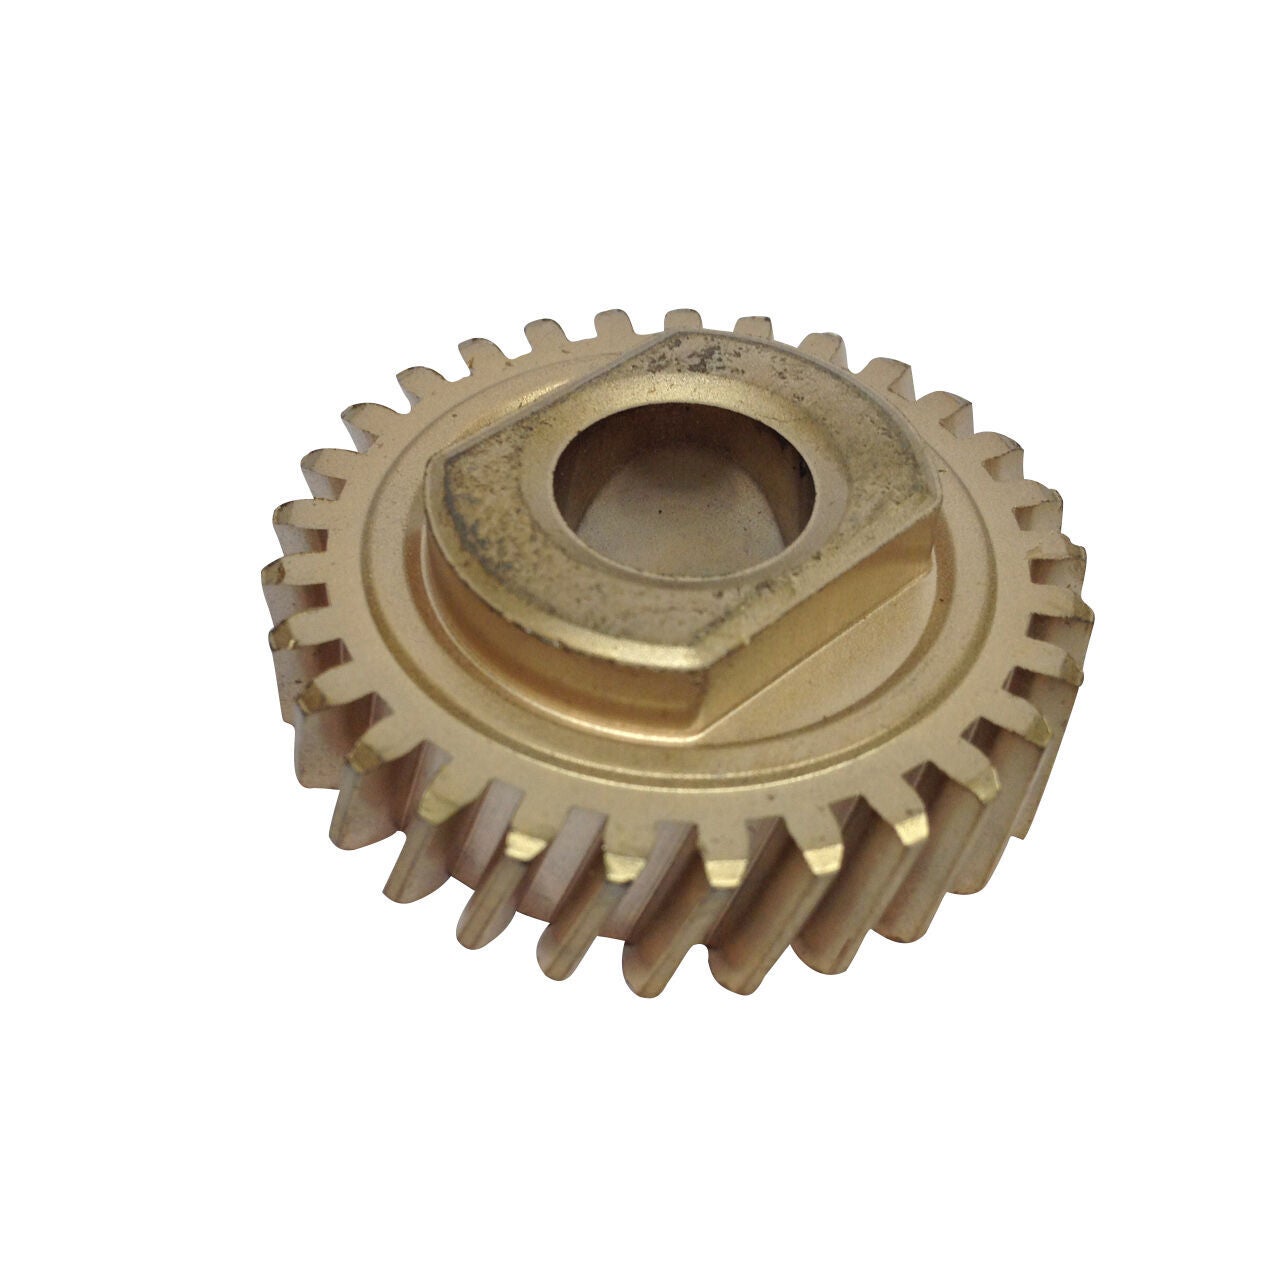 Replacement for KitchenAid Stand Mixer Worm Follower Gear